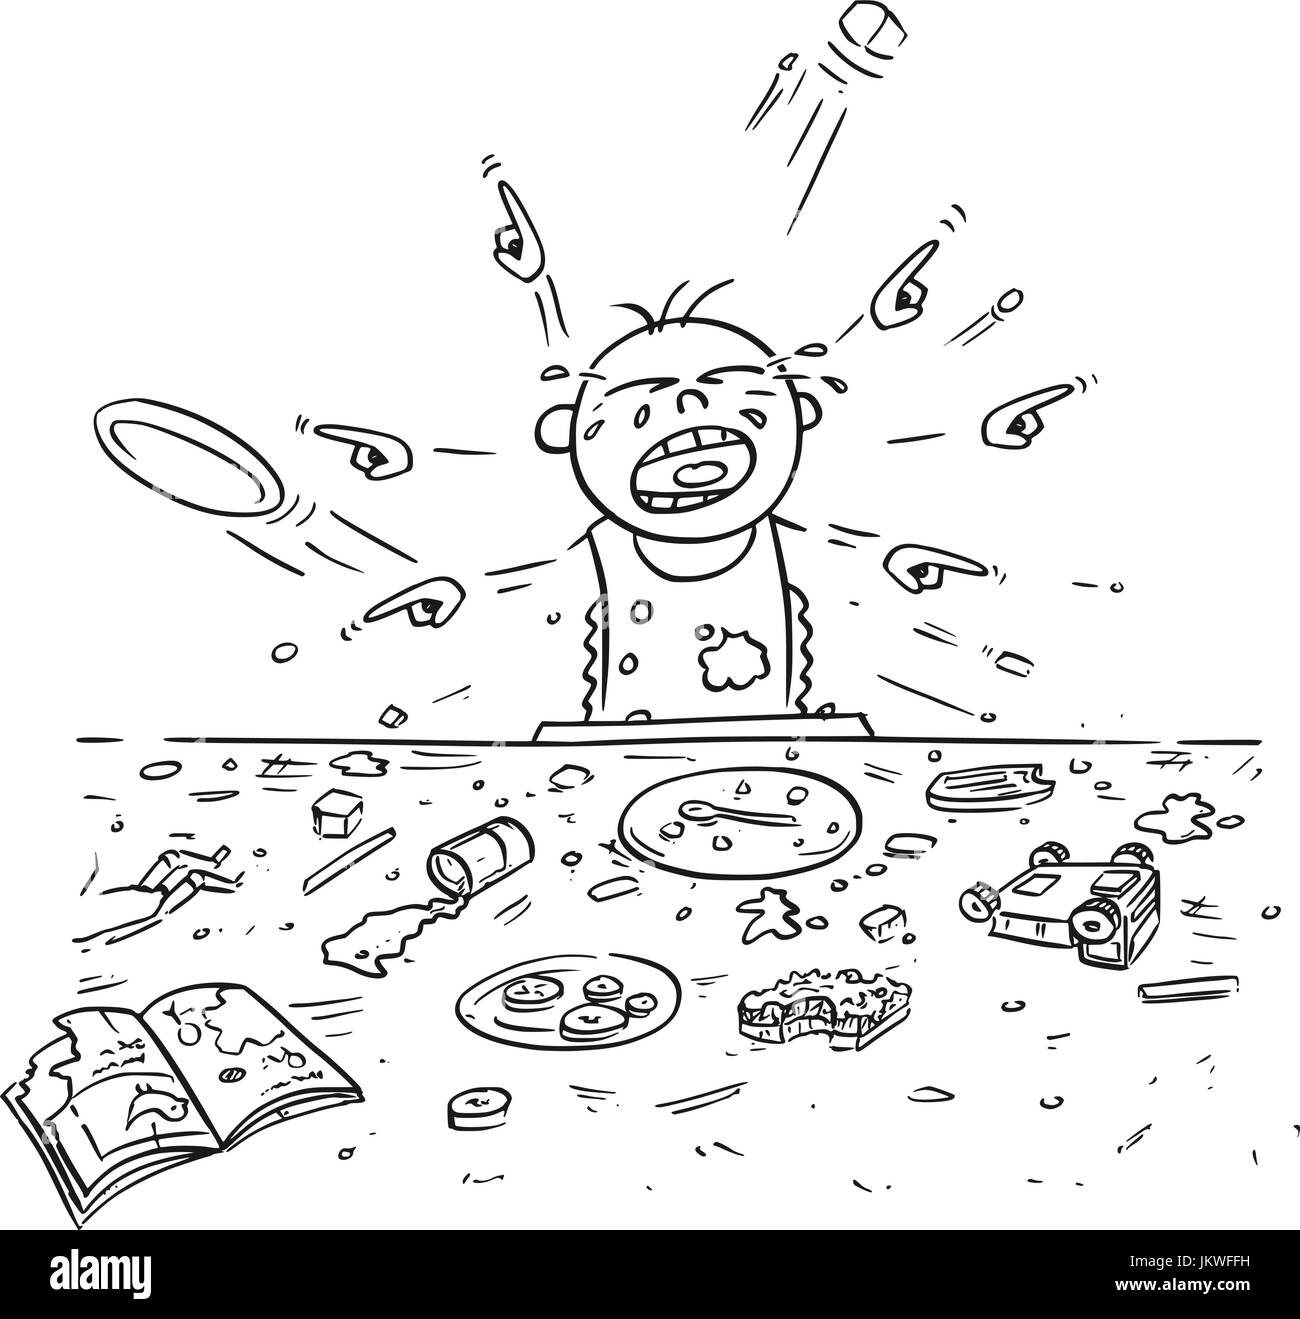 Hand drawing cartoon vector illustration of spoiled spoilt crying baby doing mess around during eating, pointing and demanding things all around. Stock Vector